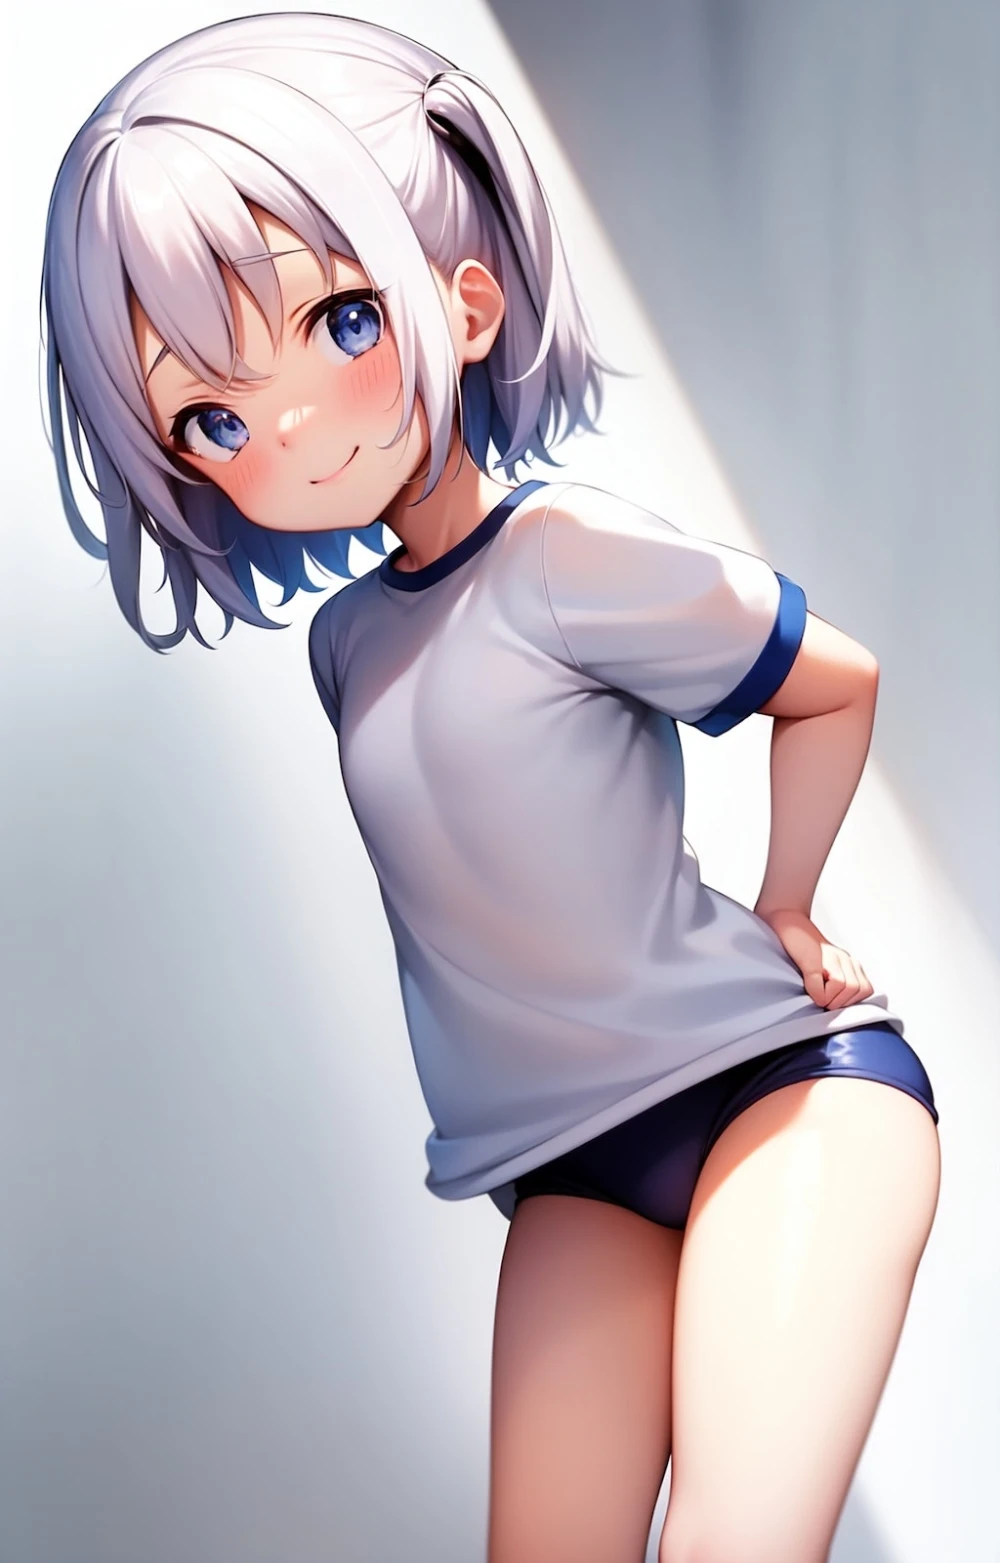 bloomers-anime-style-all-ages-2-47